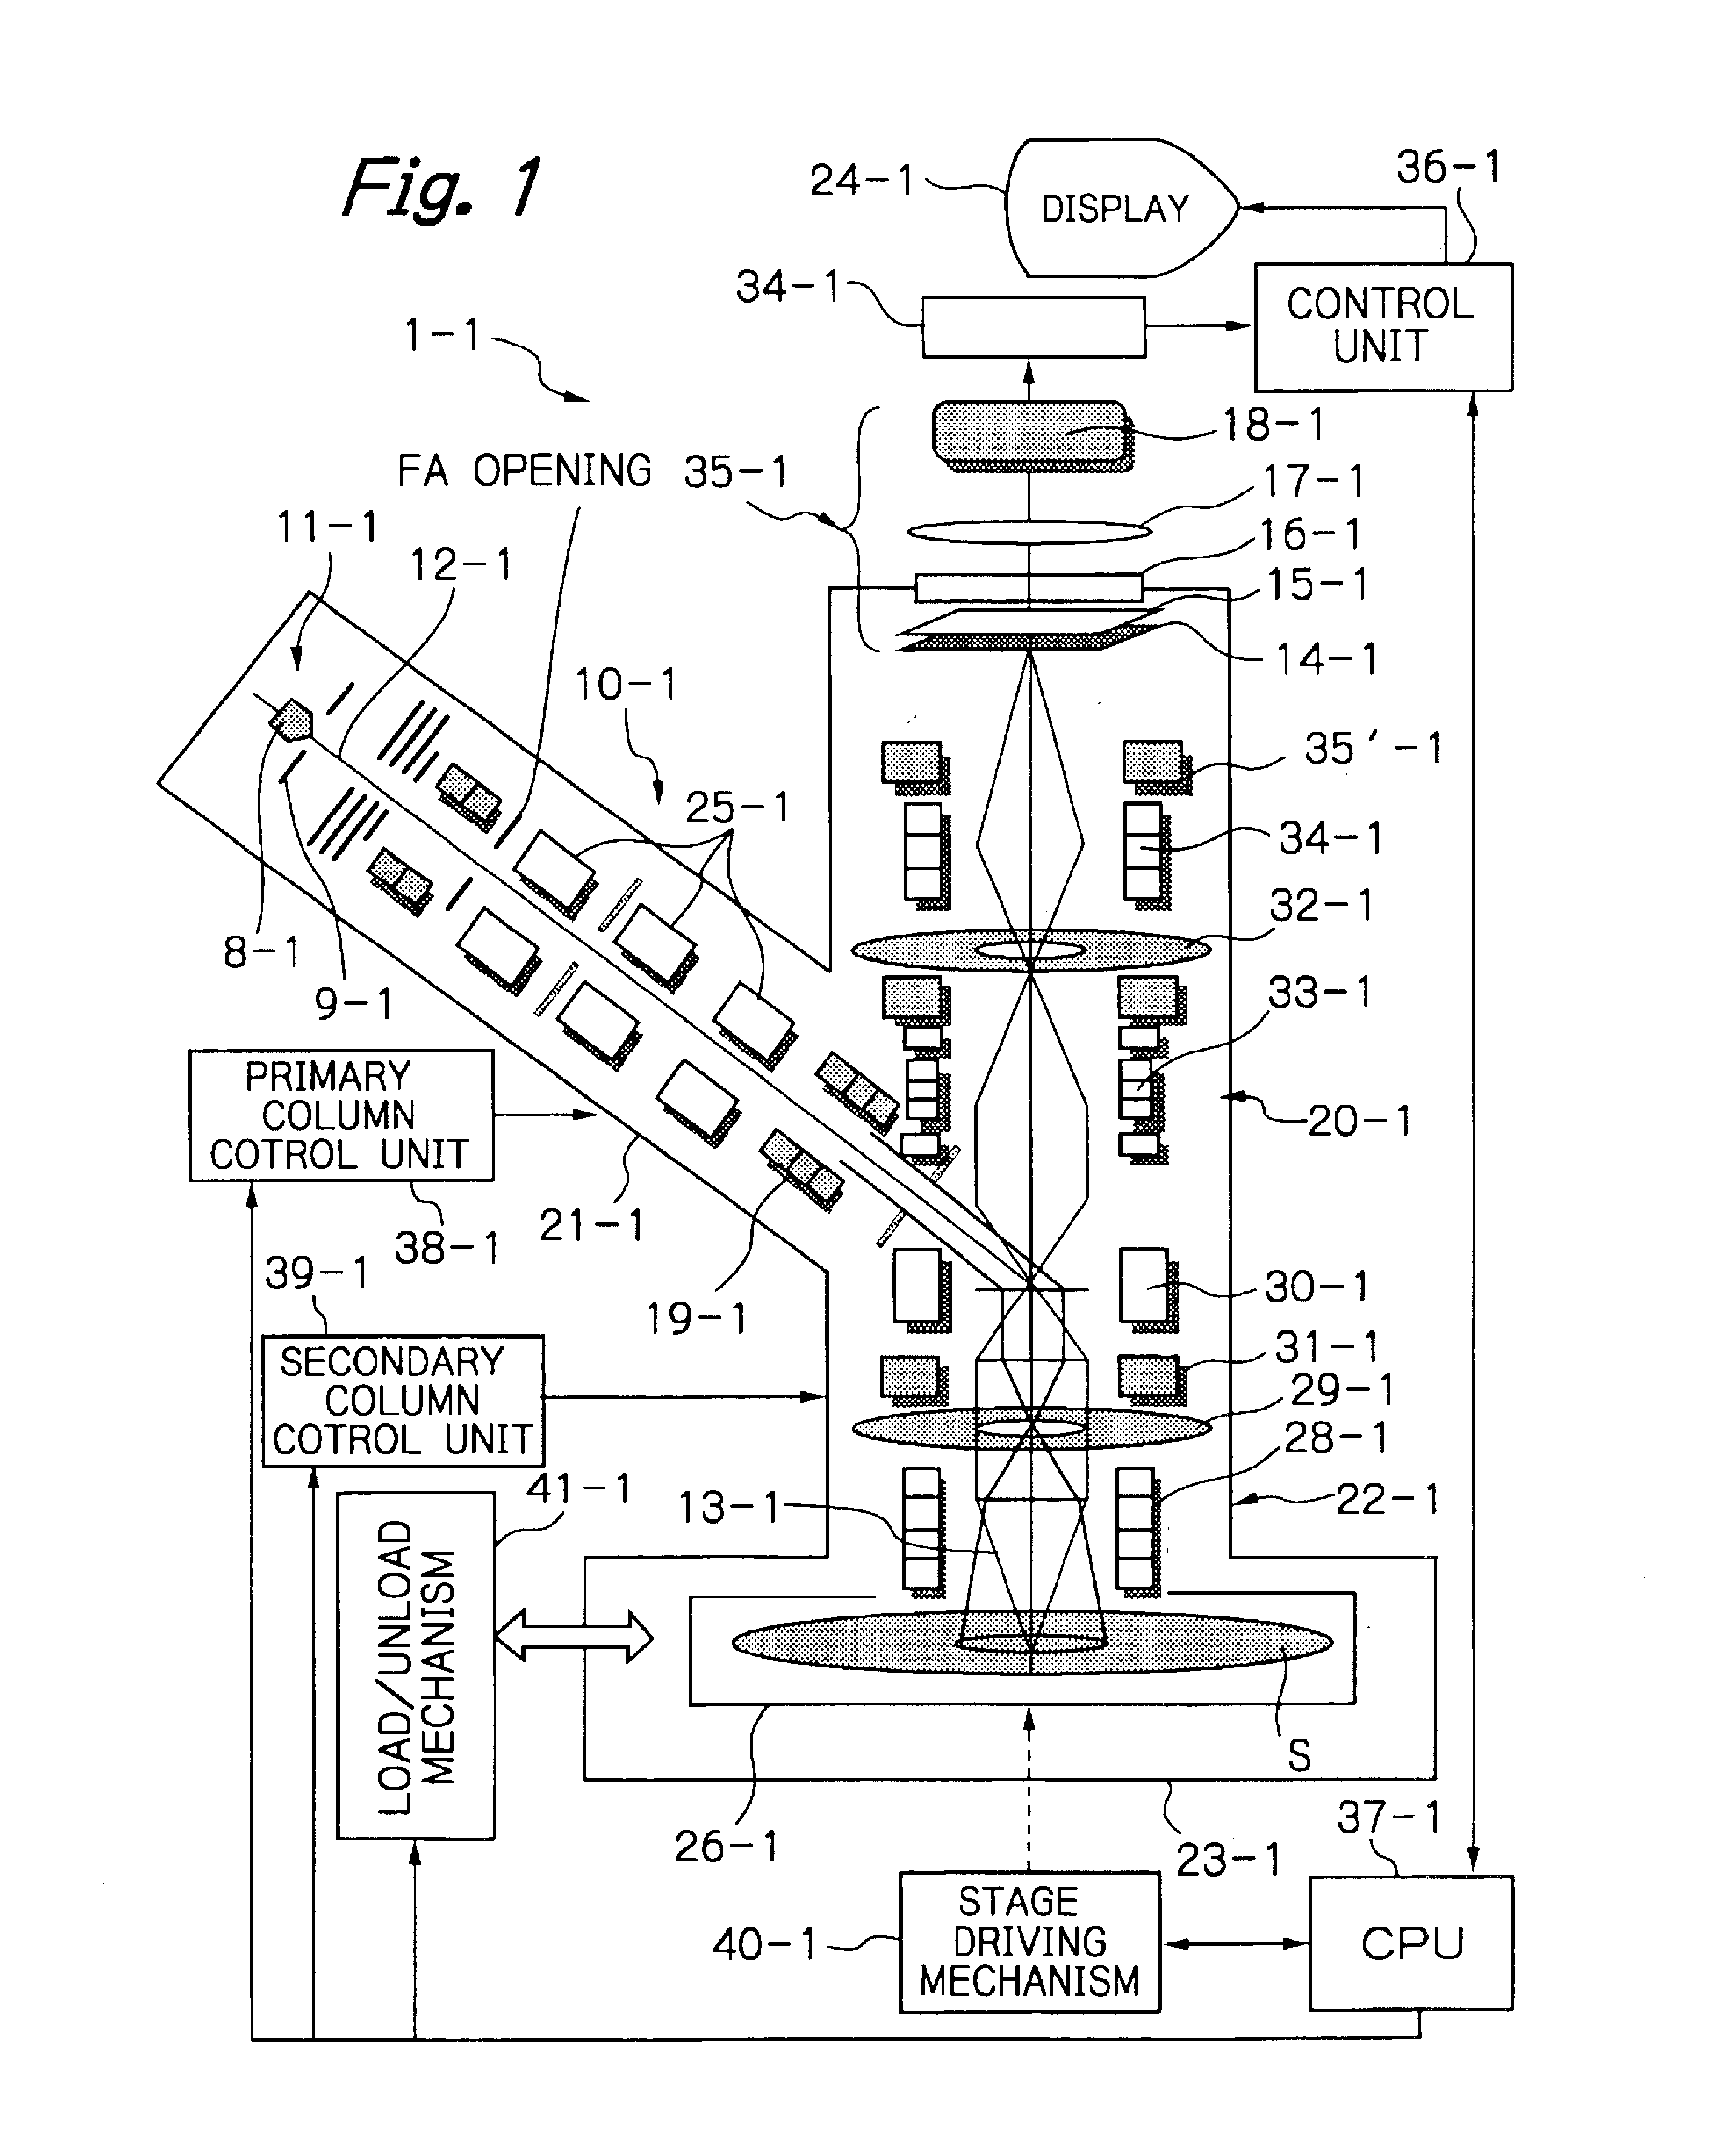 Apparatus for inspection with electron beam, method for operating same, and method for manufacturing semiconductor device using former